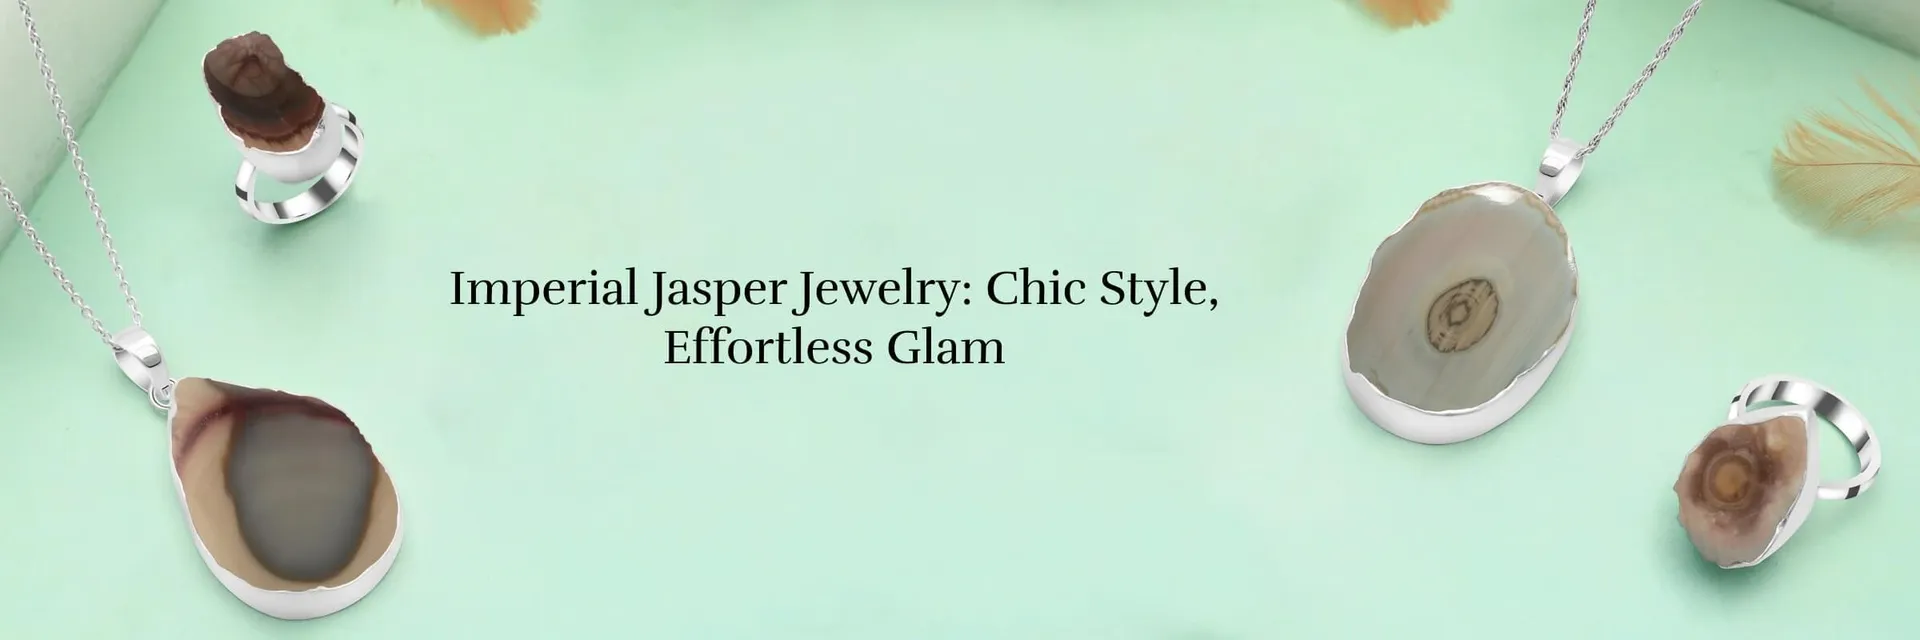 Effortless Glamour: Imperial Jasper Jewelry for Effortlessly Chic Style

Although not yet understood by science, the egg-like structures that are a defining feature of Imperial Jasper and have symbolic value are still a mystery. It is associated with defense, emotional restraint, and good and negative recognition. Wearing Imperial Jasper Jewelry encourages self-assurance, reflection, and acceptance of life's ups and downs.

Visit now :- https://www.rananjayexports.com/blog/imperial-jasper-jewelry-for-effortlessly-chic-style